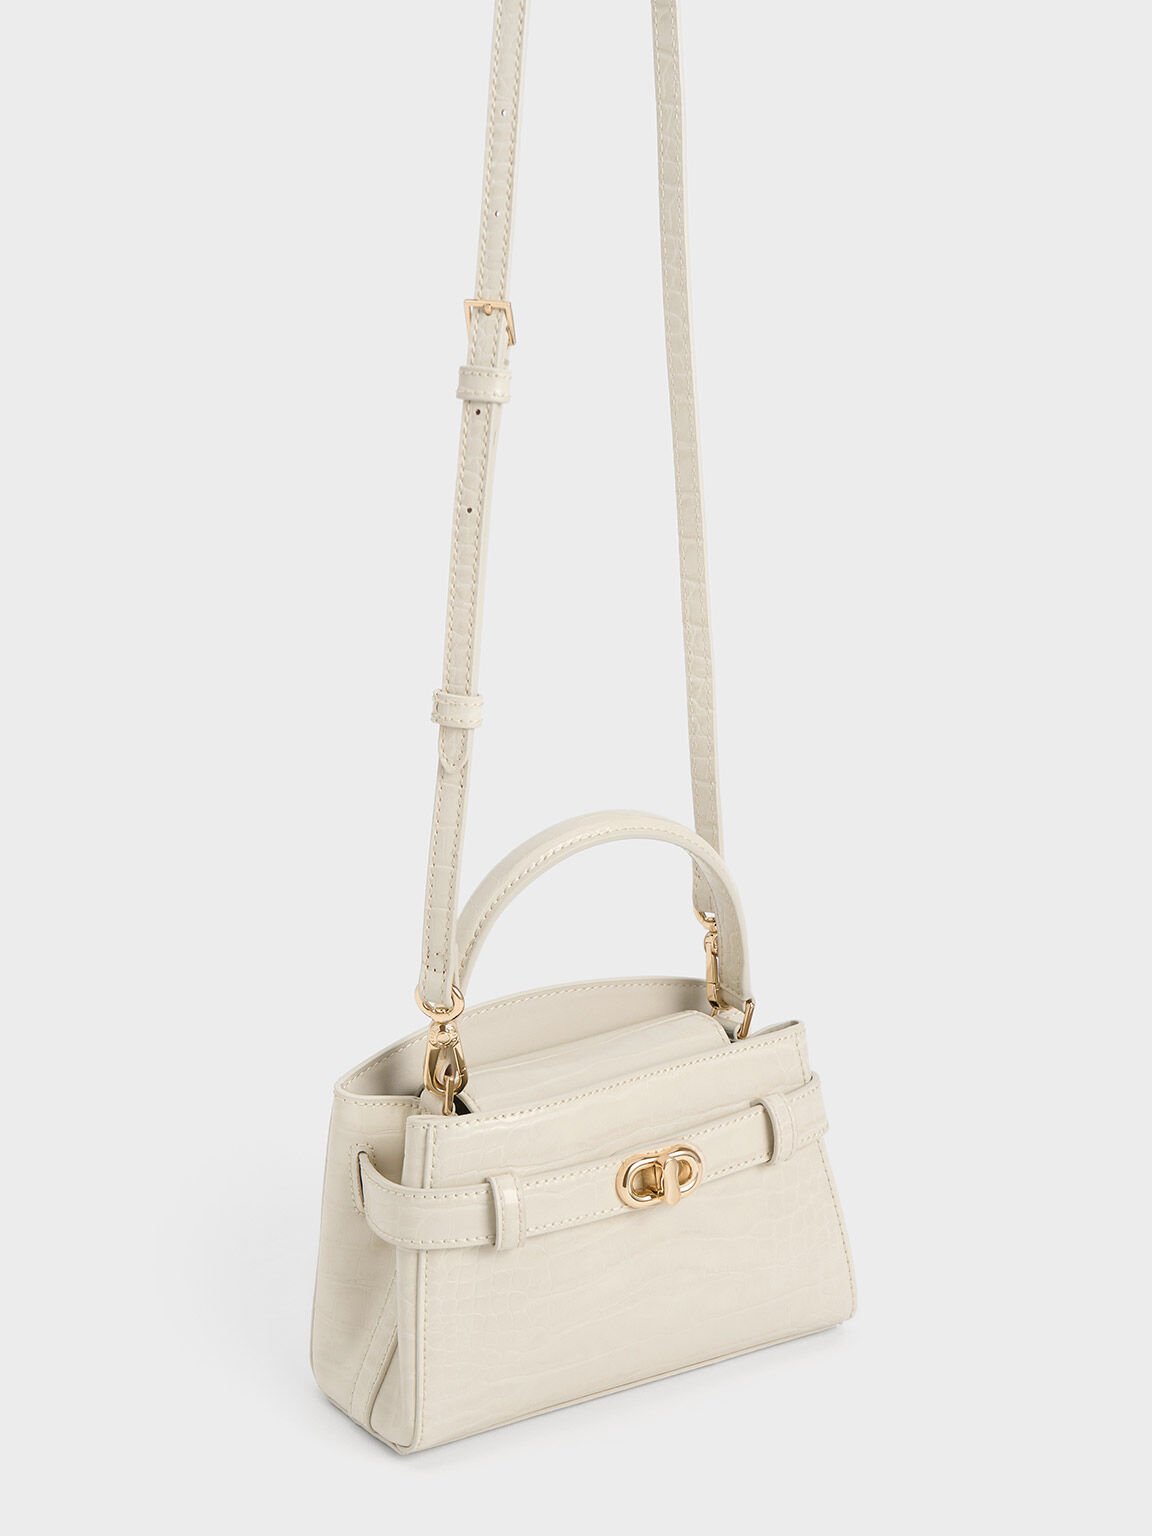 Ivory Aubrielle Croc-Effect Top Handle Bag - CHARLES & KEITH PH